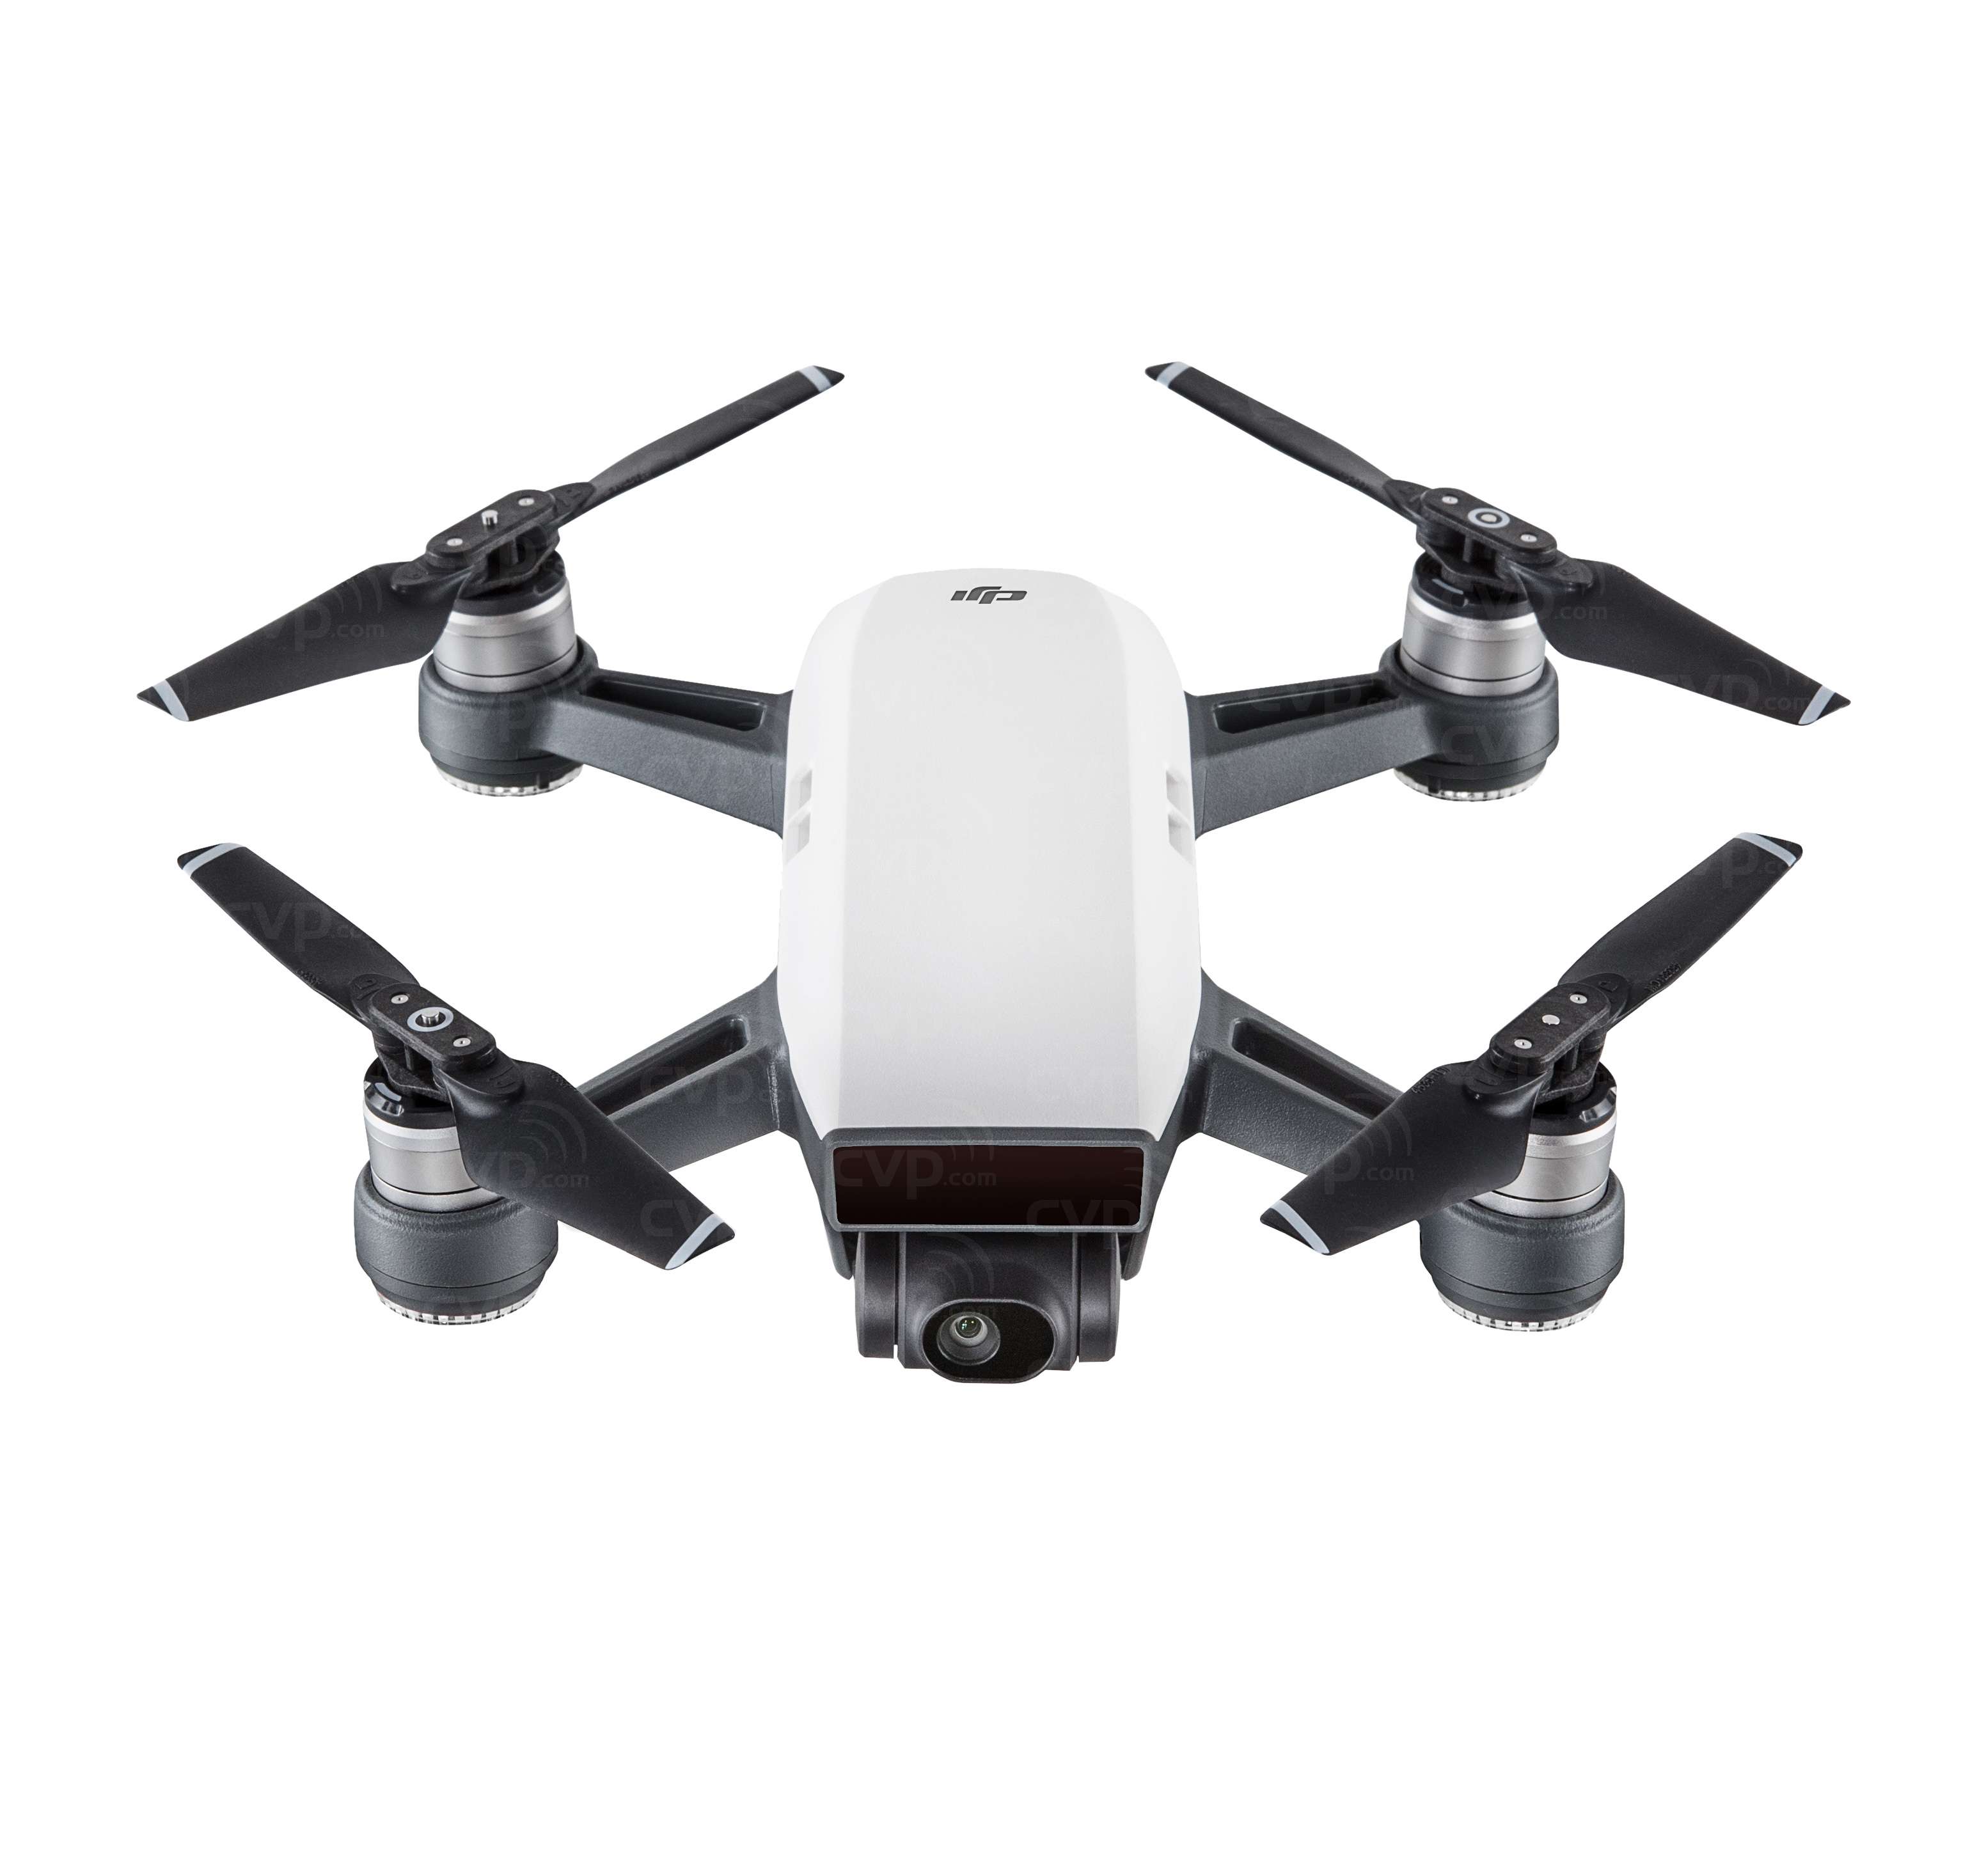 Buy - DJI SPARK - Palm-Sized Quadcopter with 12 Megapixel Gimbal ...